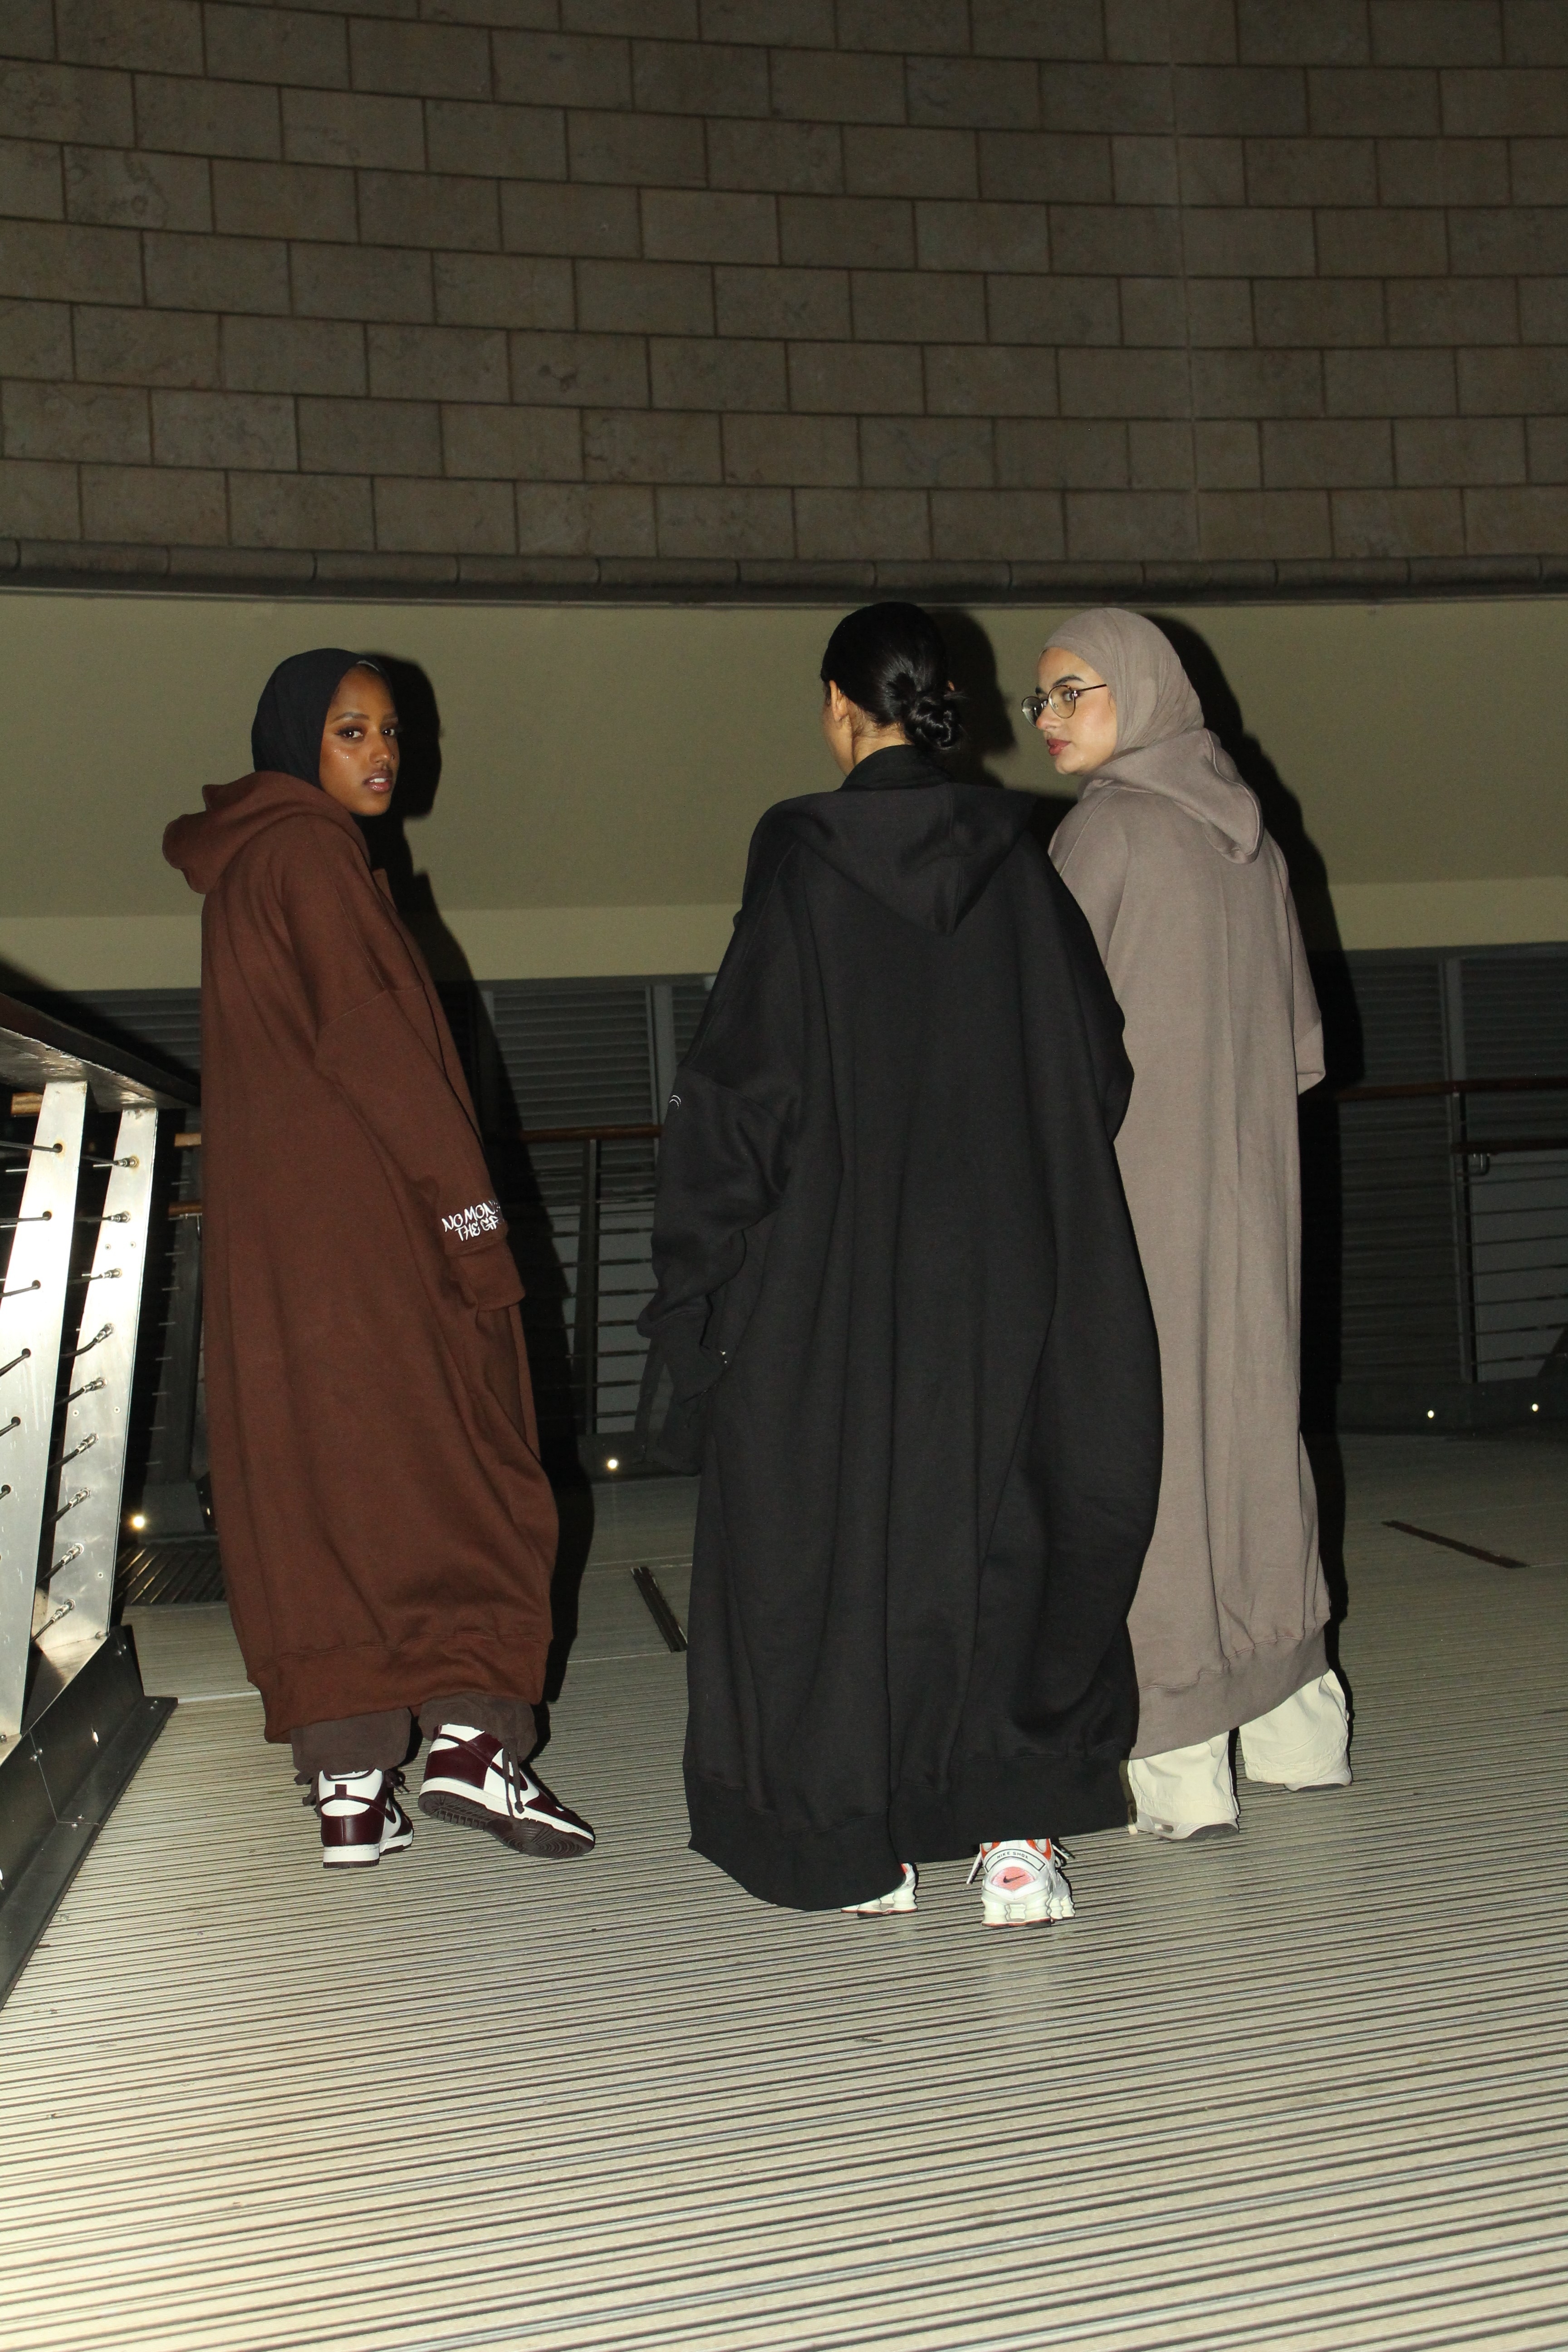 Three individuals wearing oversized hooded robes, standing in conversation